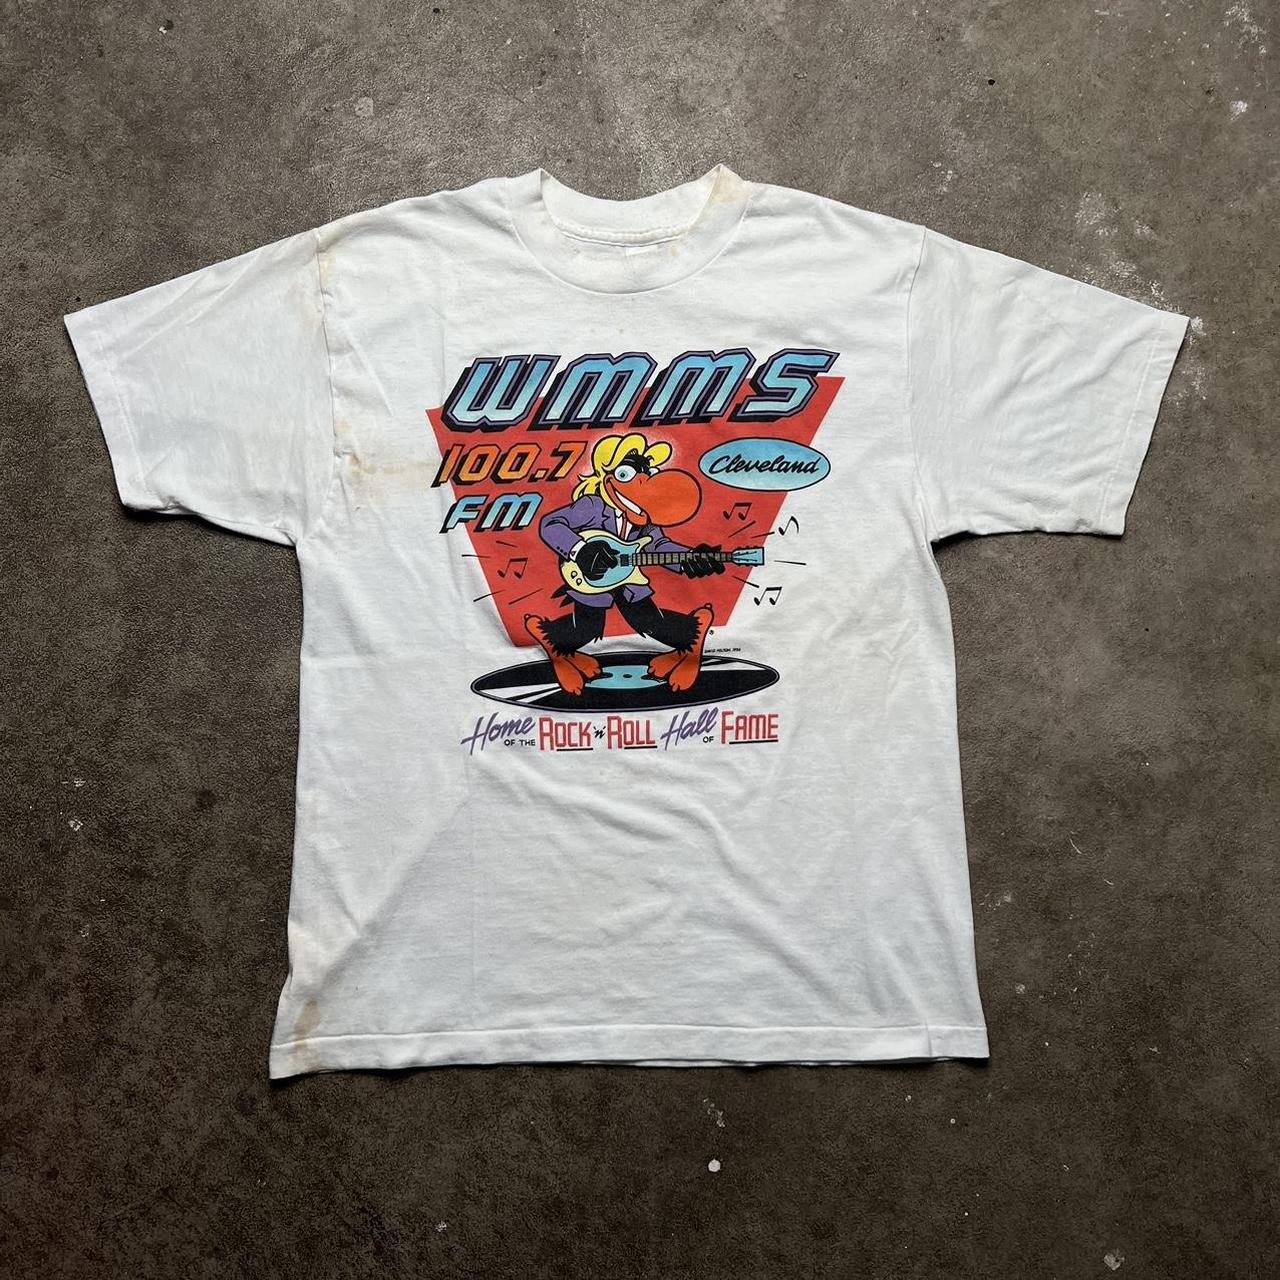 Vintage 1986 WMMS 100.7 FM Cleveland Rock and Roll... - Depop